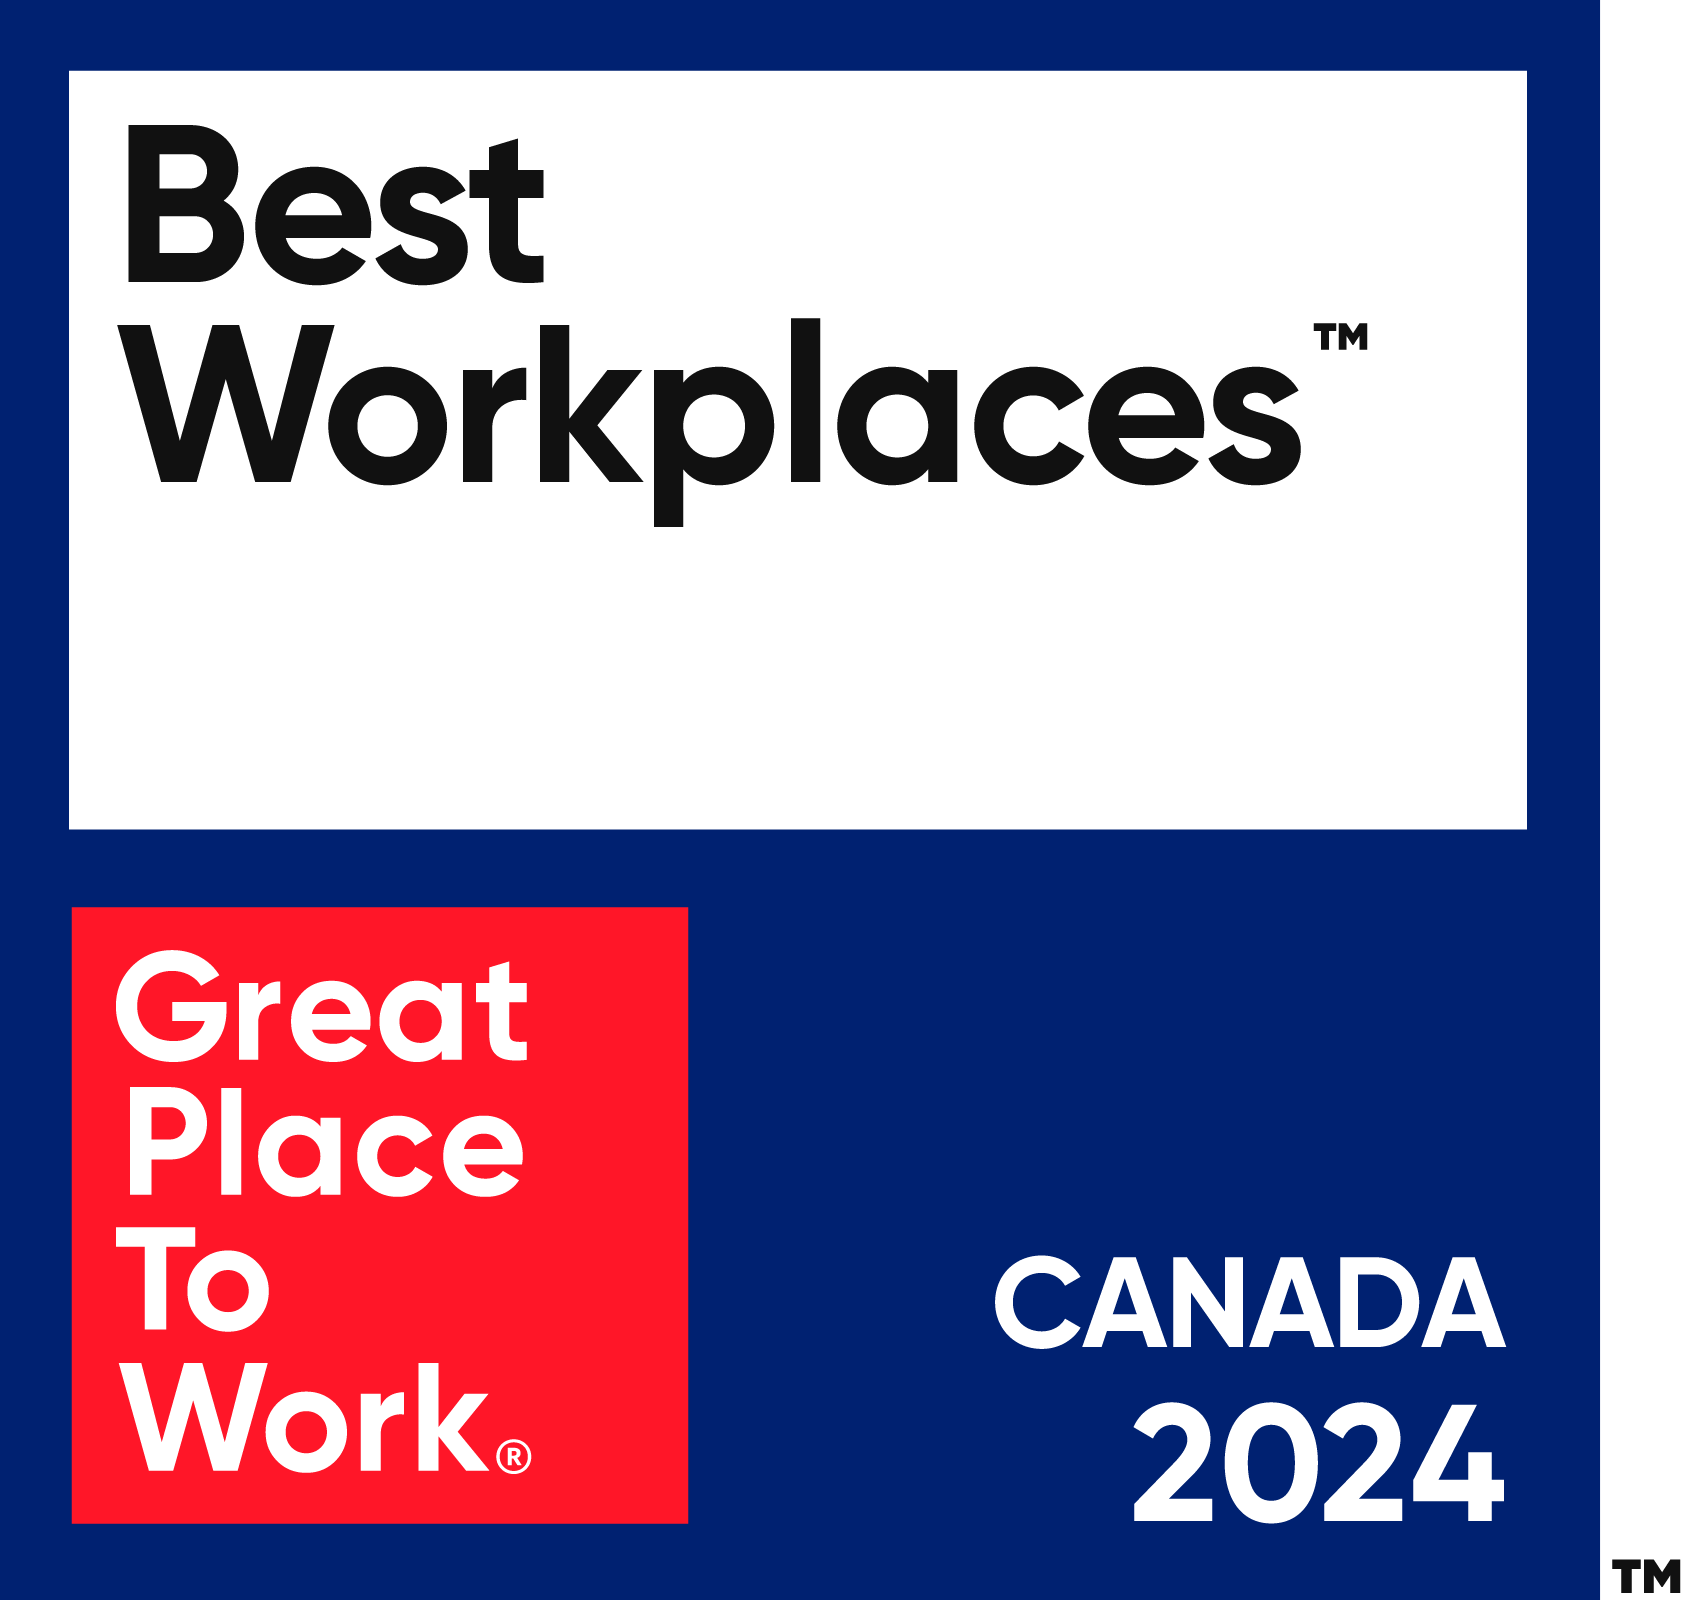 Best Workplaces. Great Place To Work. Canada 2024